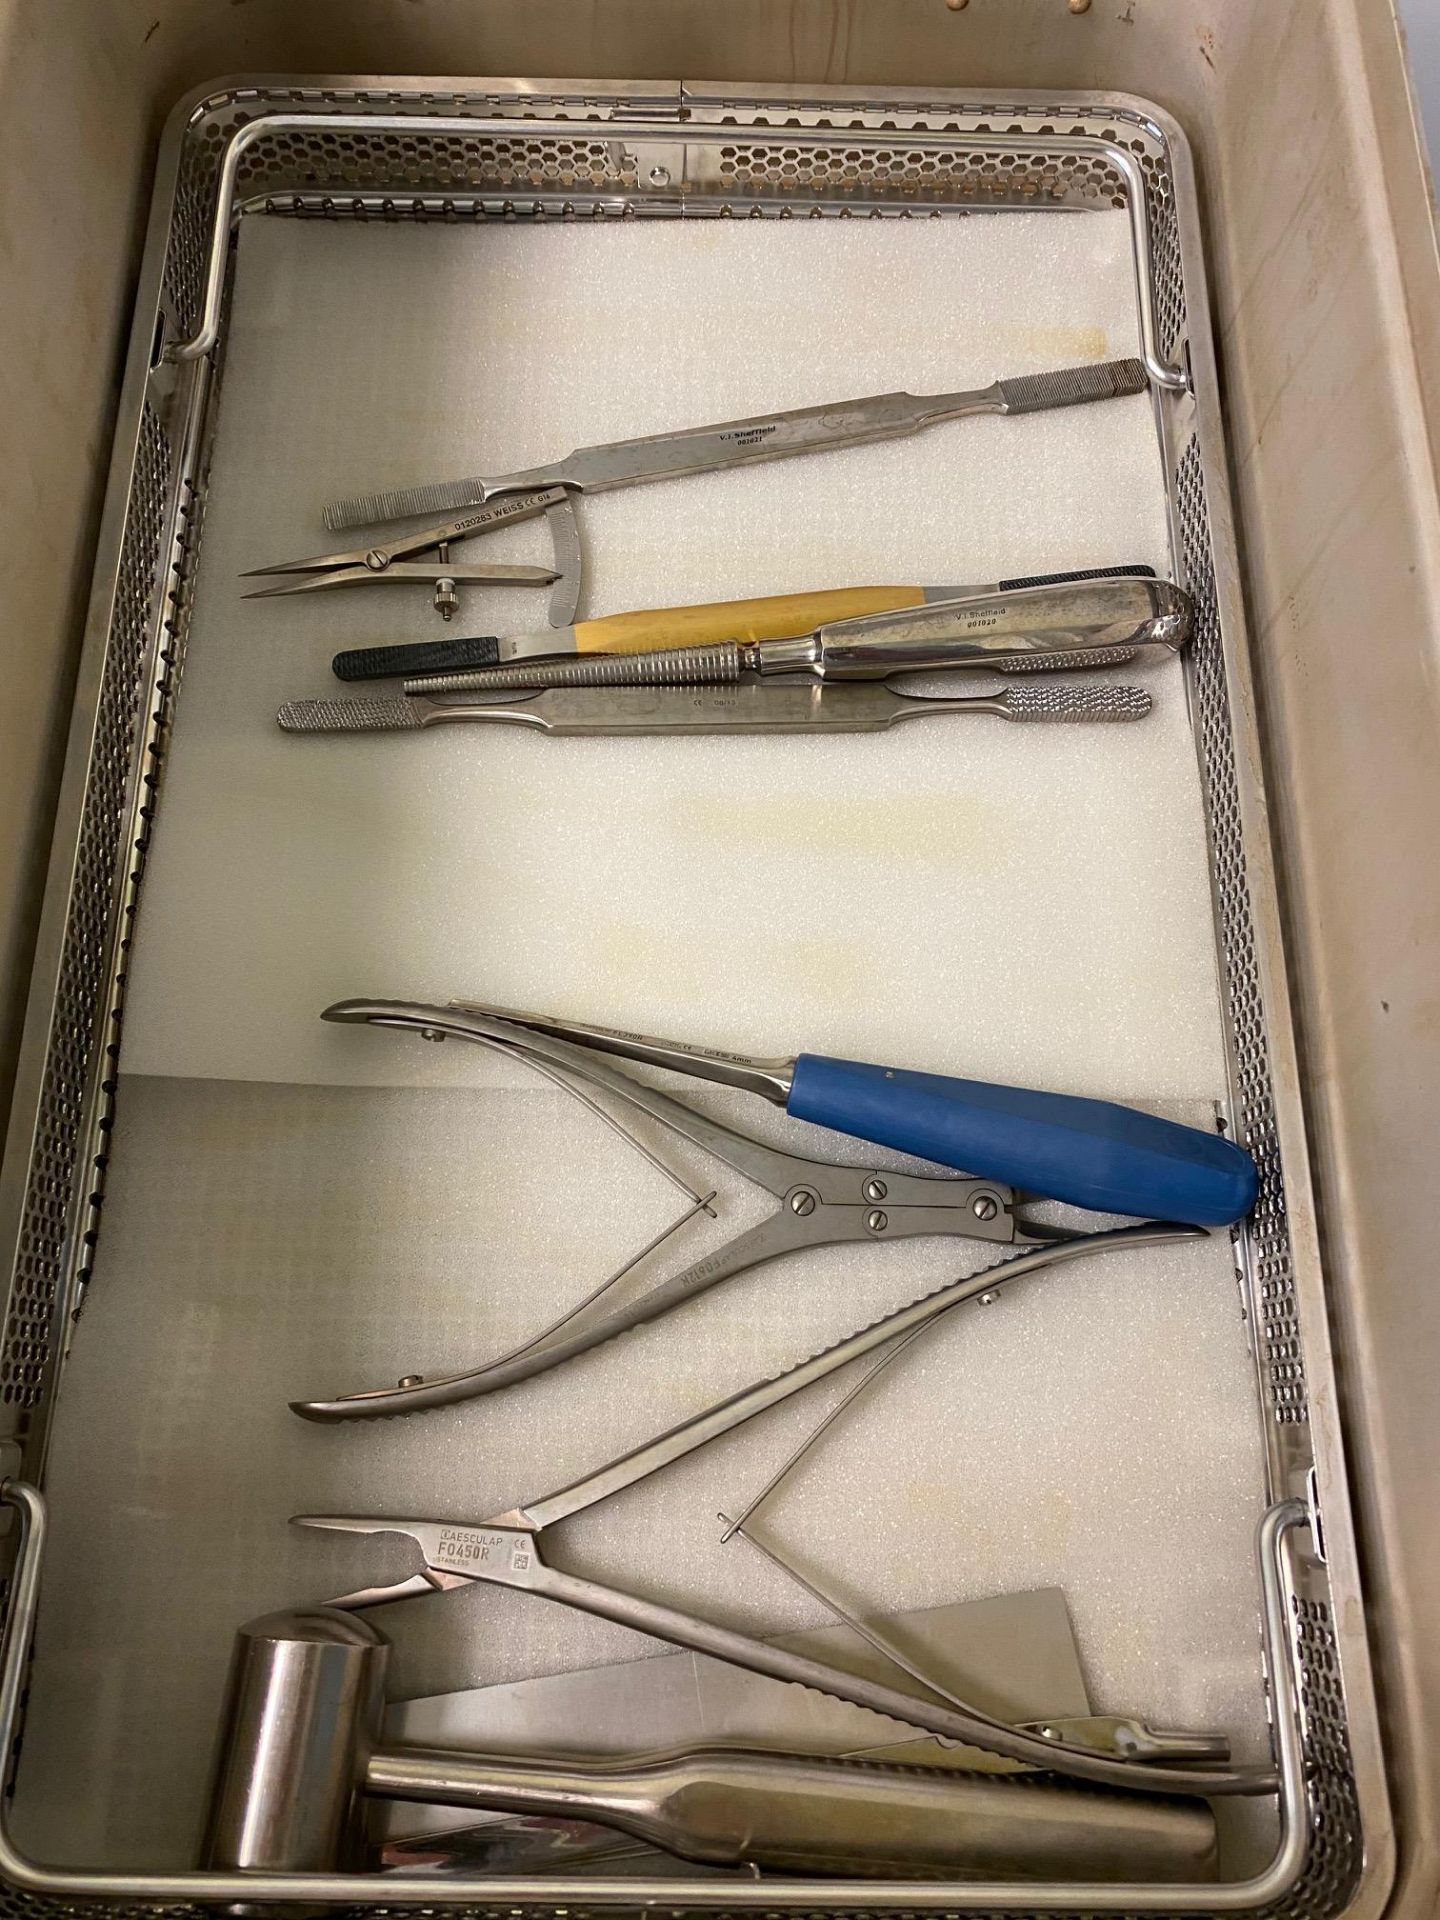 Aesculap surgical storage container with sulcoplasty instruments - Please note container security - Image 3 of 4